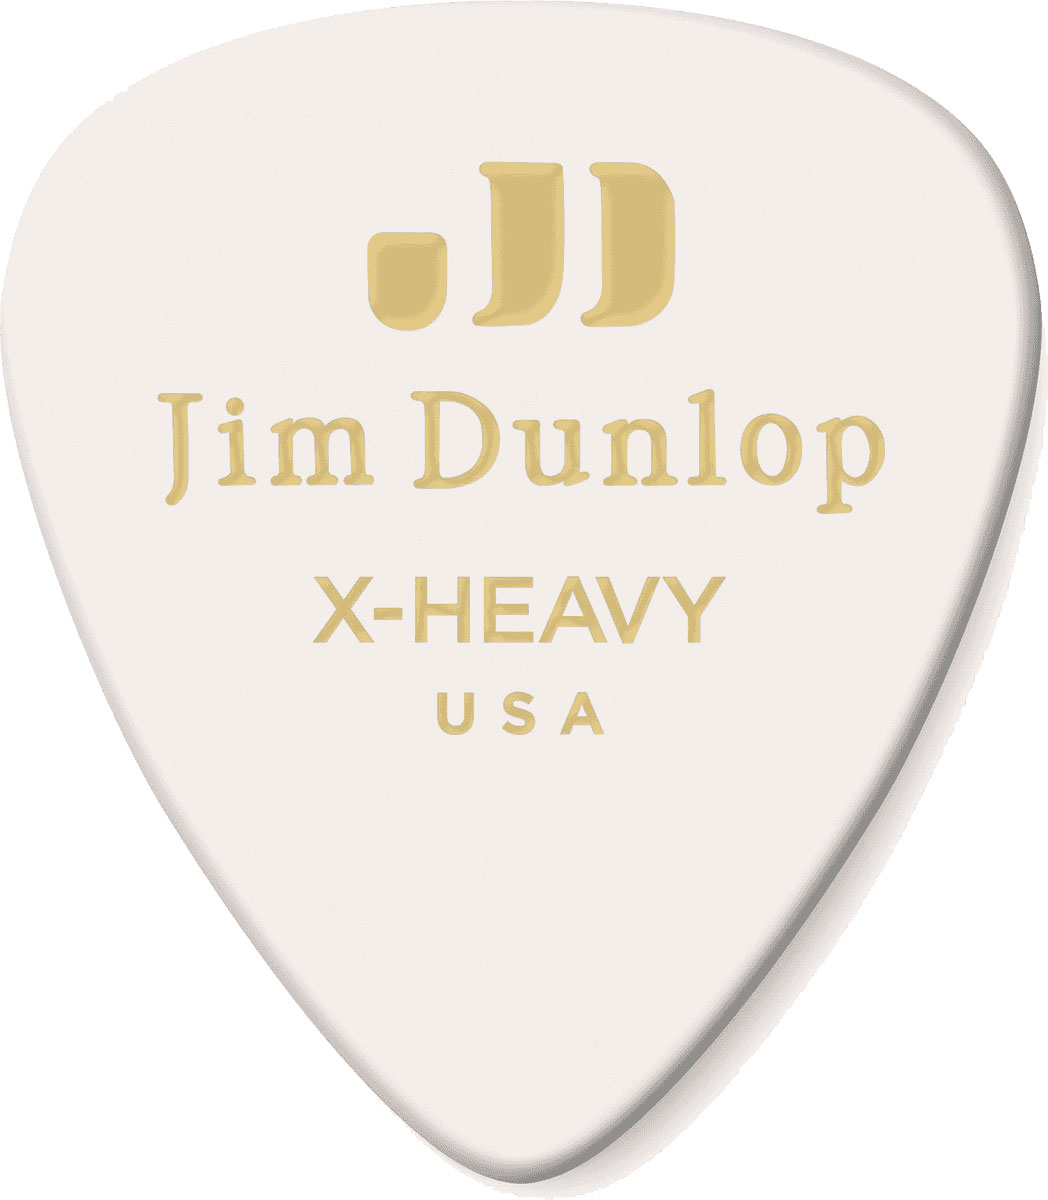 JIM DUNLOP GENUINE CELLULOID CLASSIC, PLAYER'S PACK OF 12, WHITE, EXTRA HEAVY